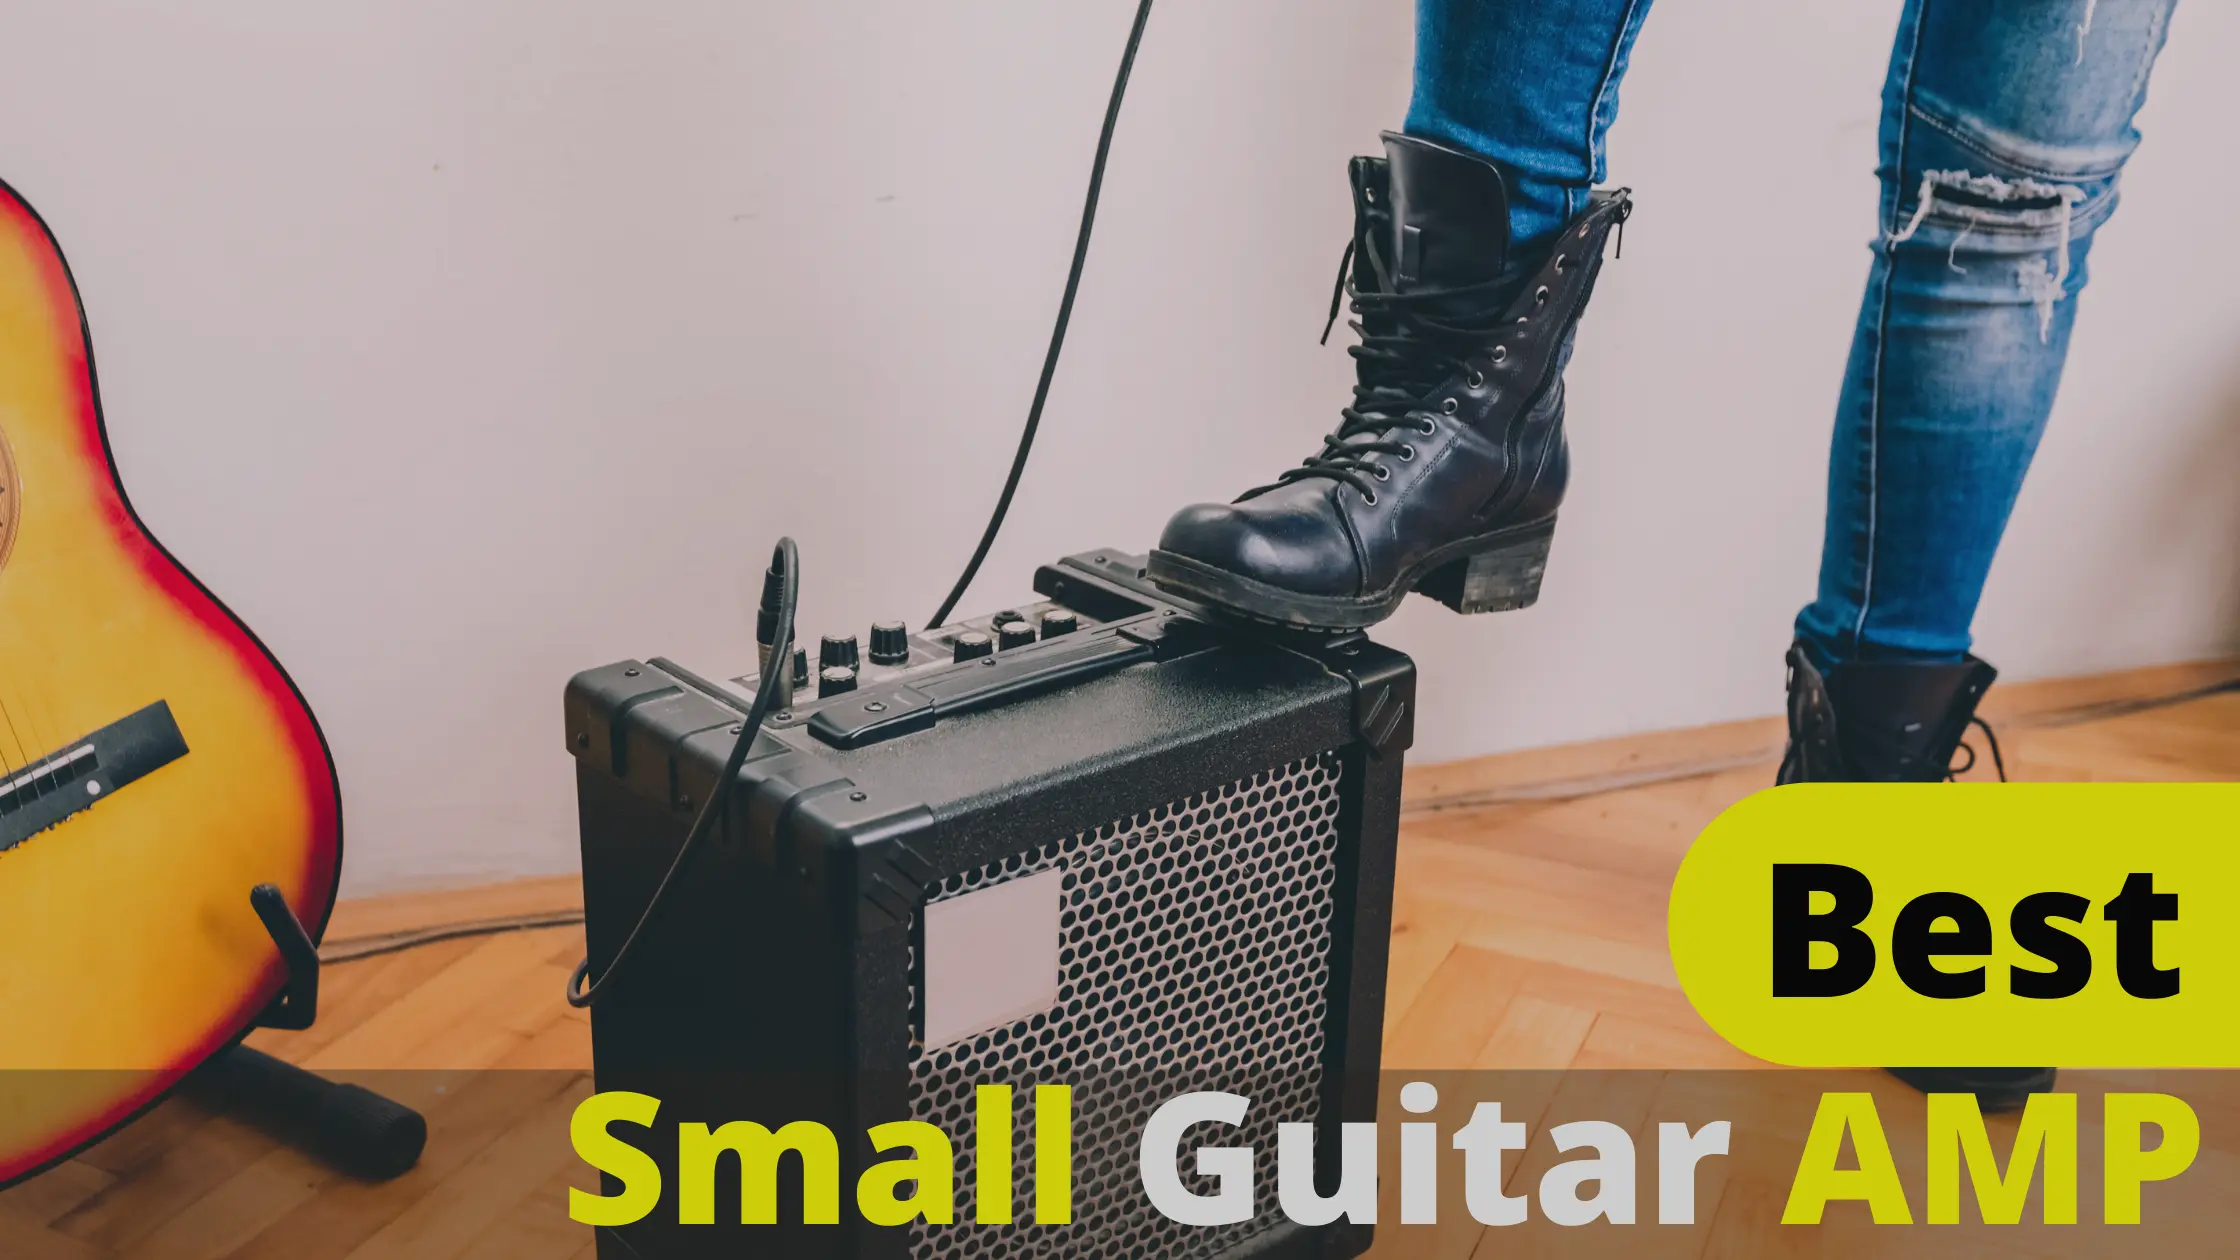 Top 10 Best Small Guitar Amp Reviews and Buying Guide 2022